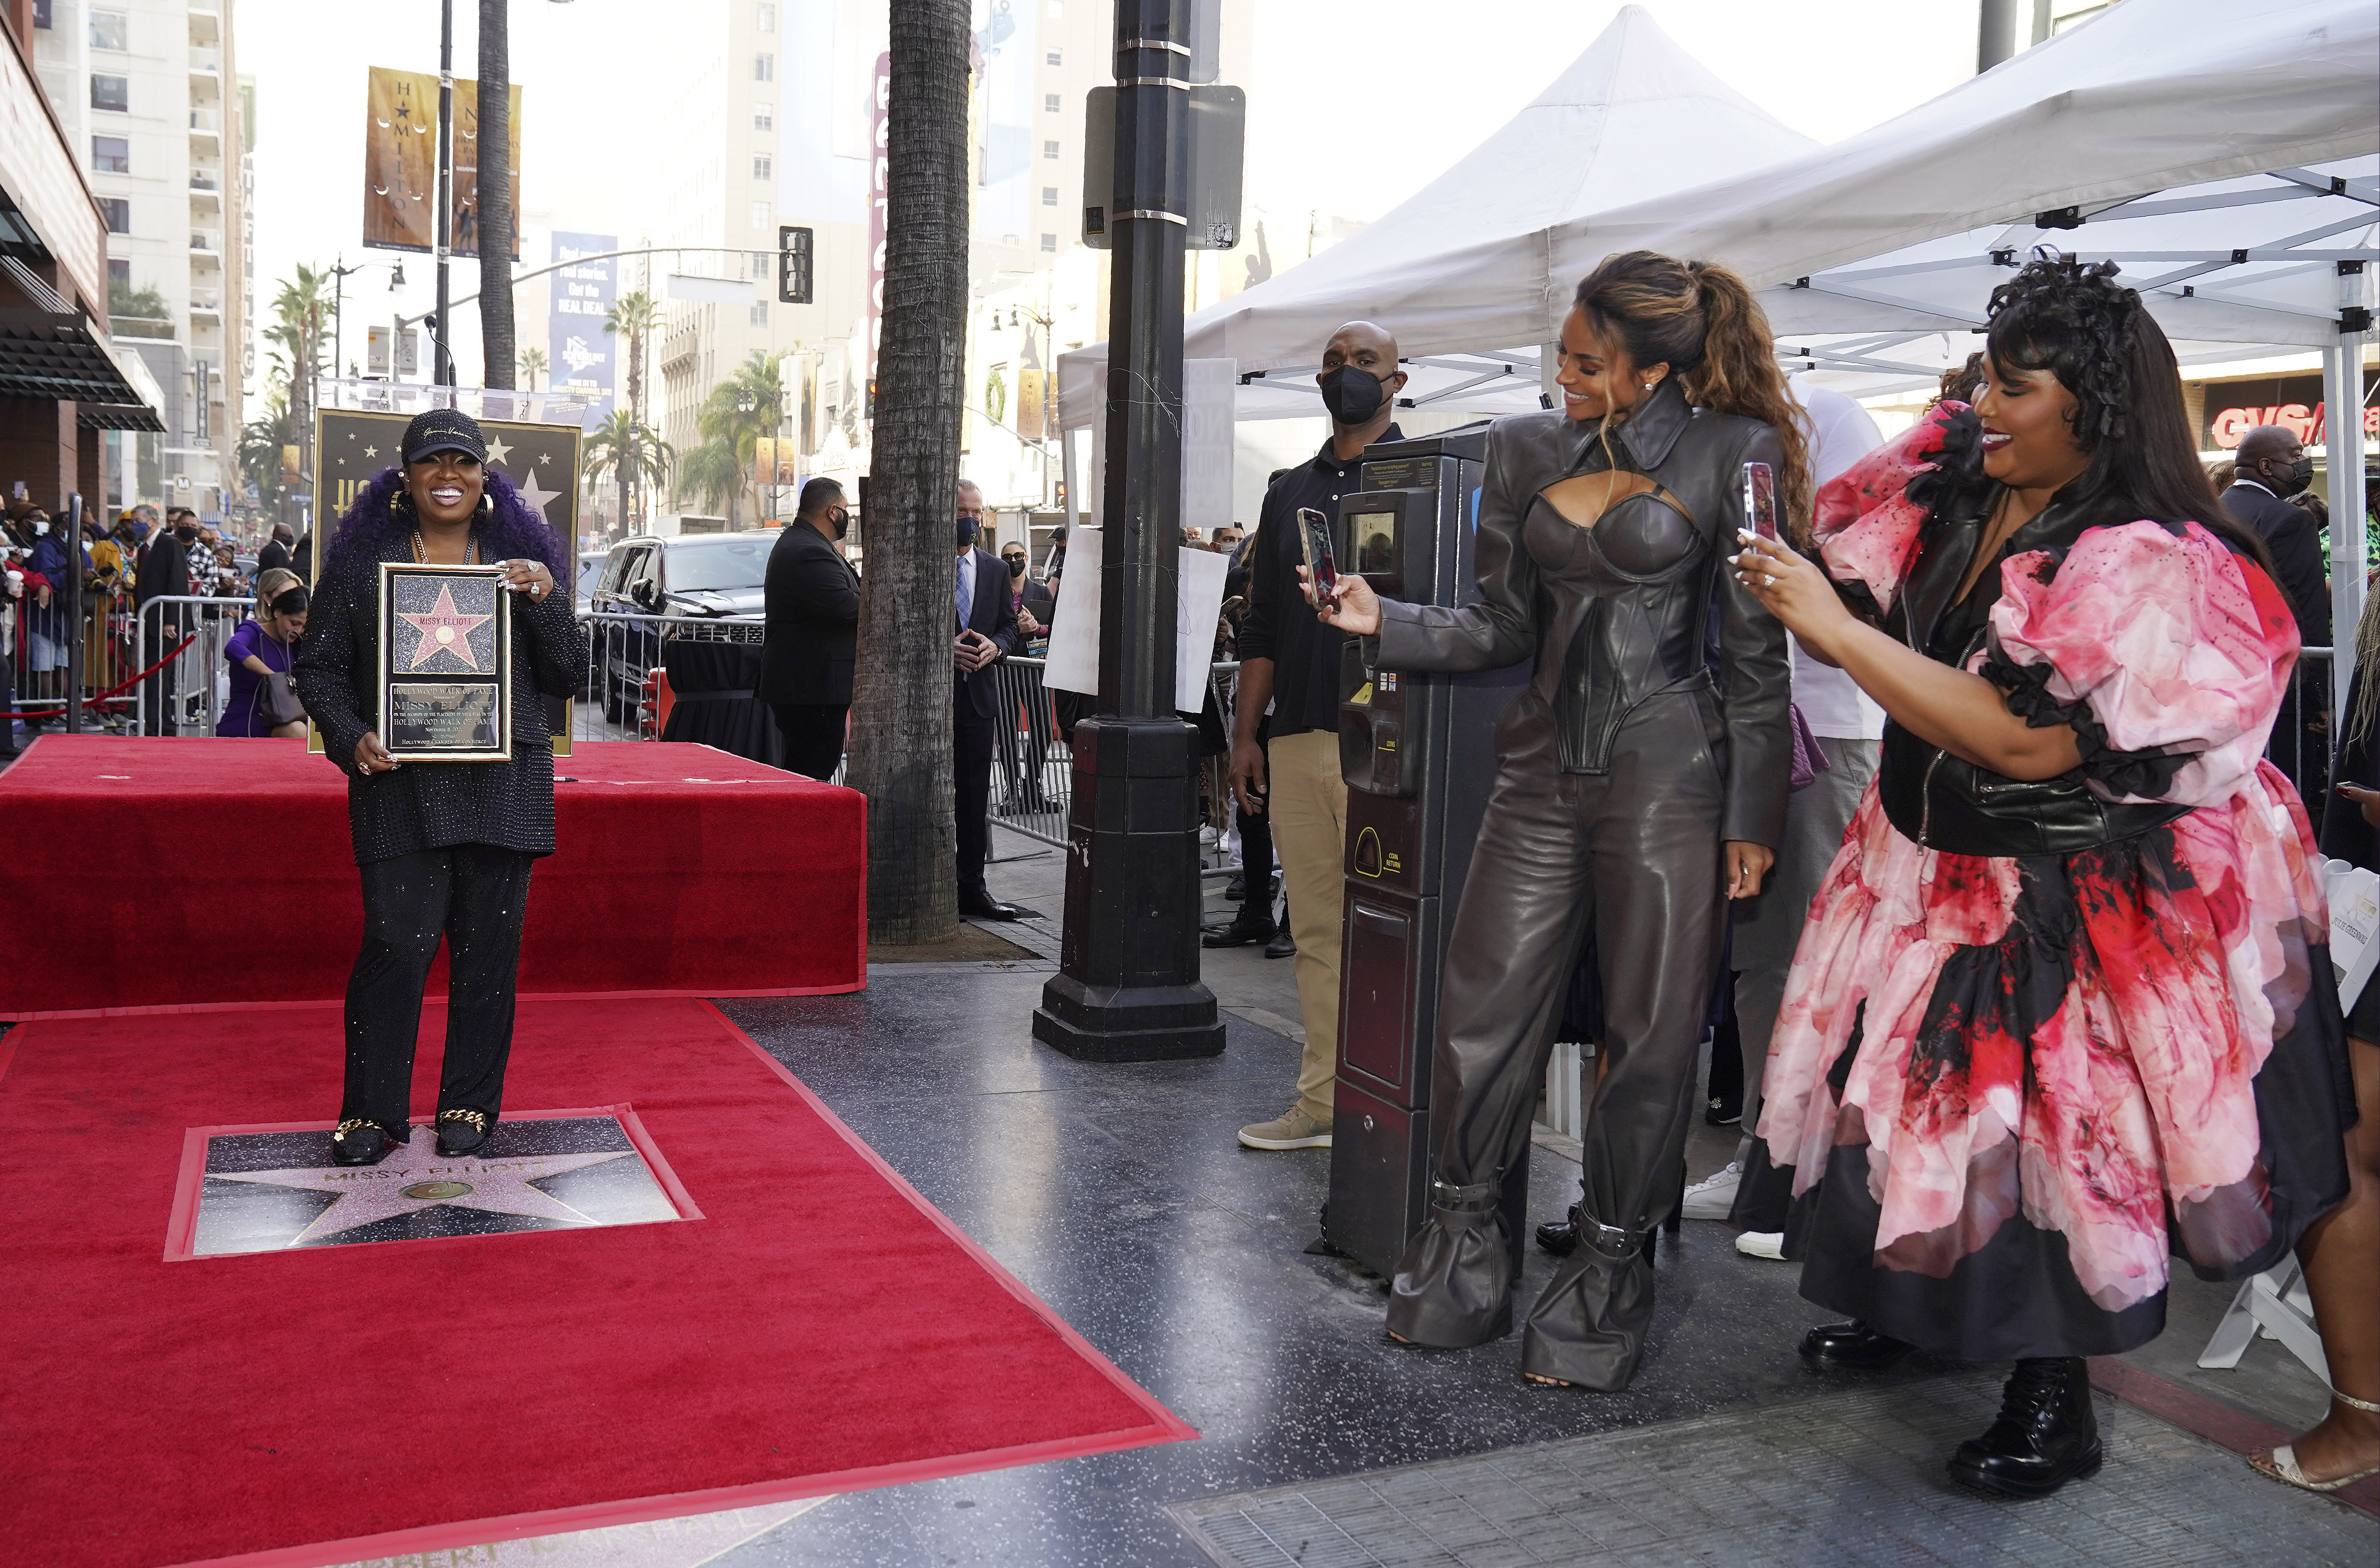 Singers Lizzo, far right, and Ciara, second from right, take pictures of hip hop artist Missy Elliott during a ceremony to award her a star on the Hollywood Walk of Fame, Monday, Nov. 8, 2021, in Los Angeles.